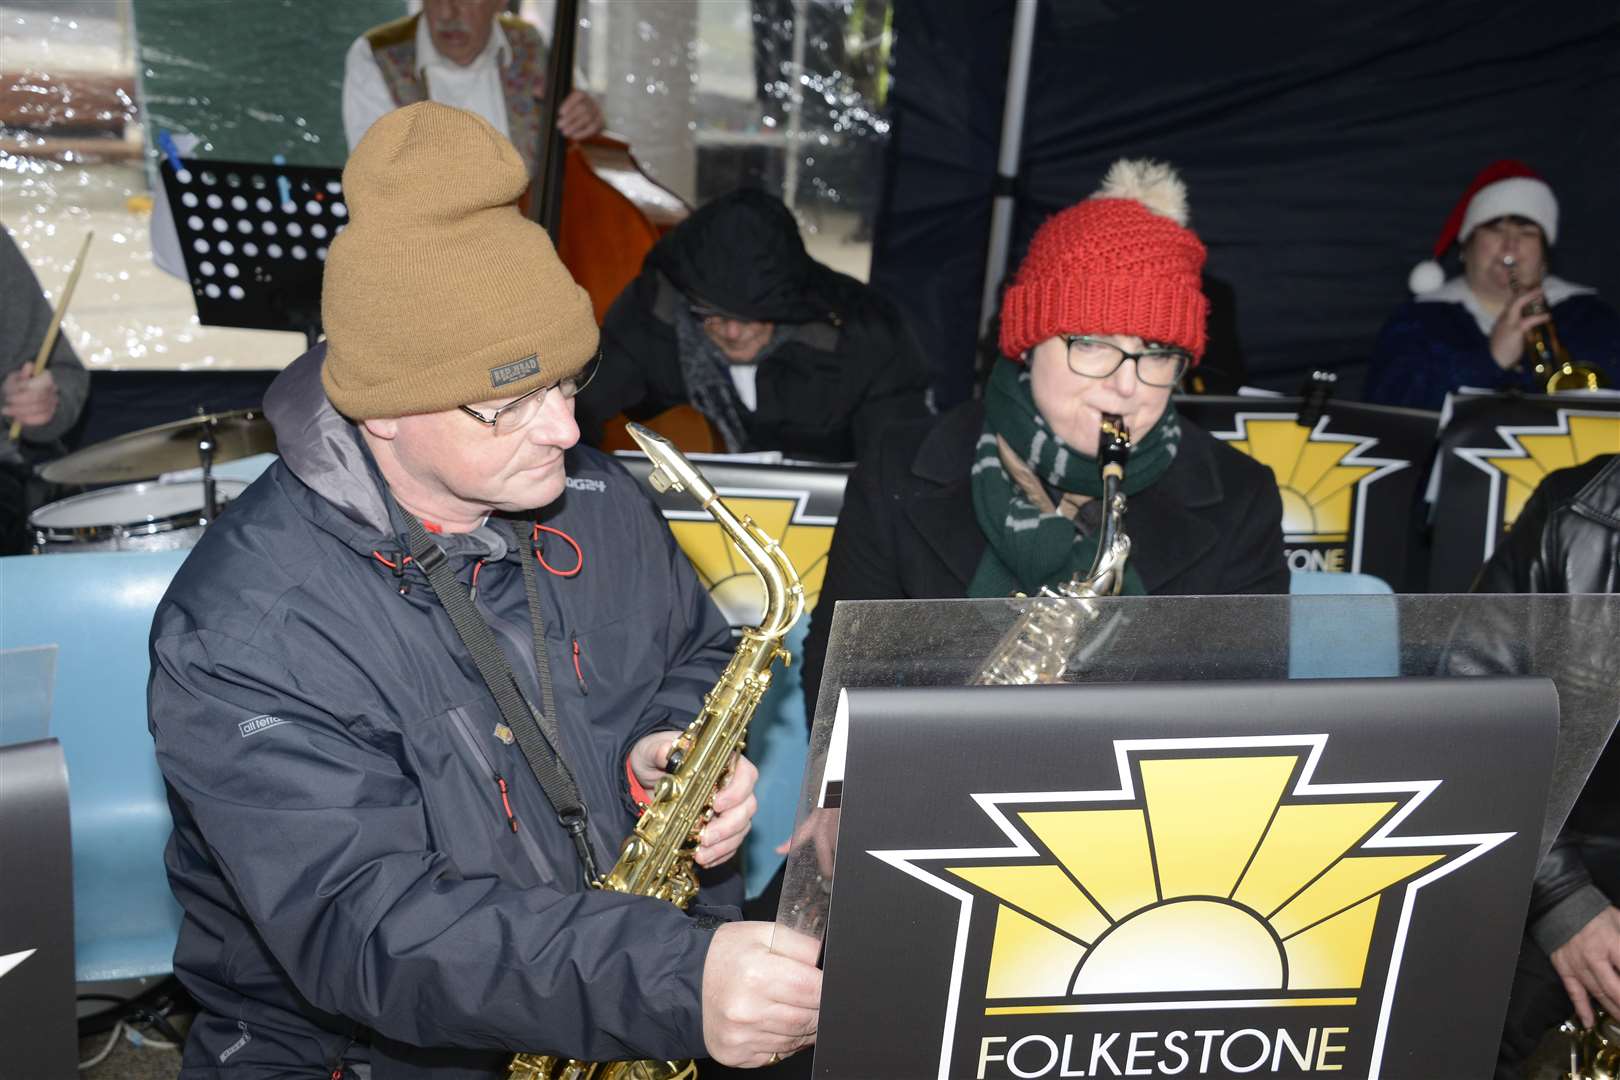 The Folkestone Community Swing Band played at the opening, wrapped up against the cold. Picture: Paul Amos